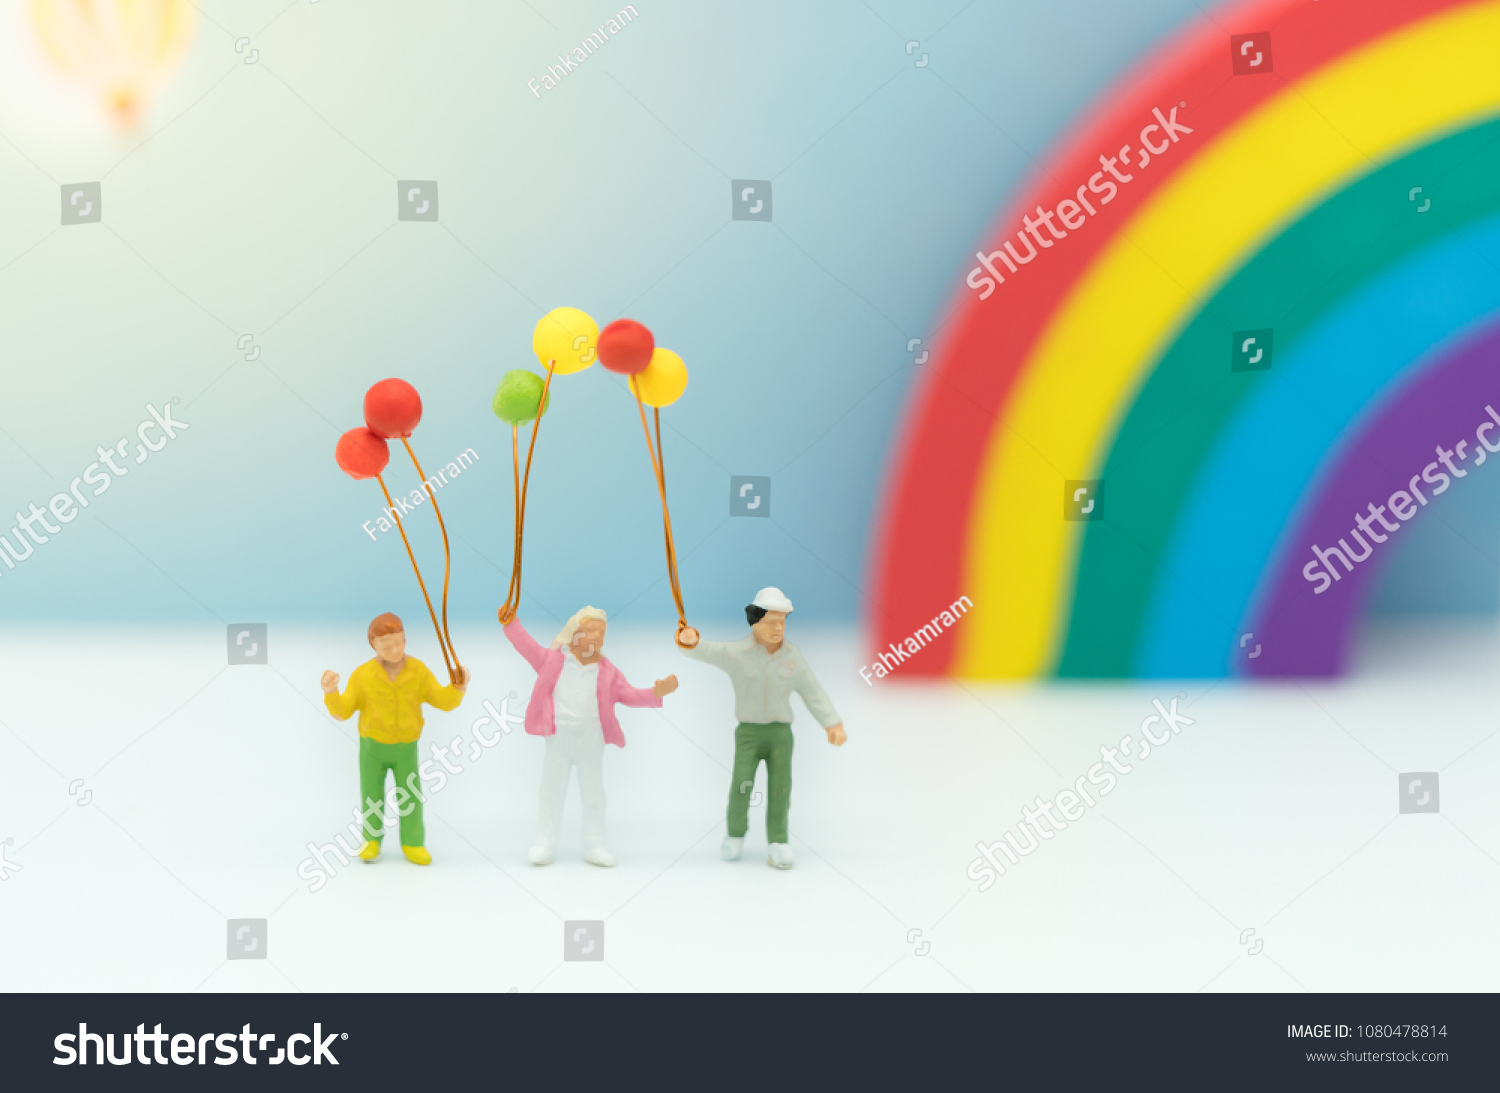 Miniature family with balloon and rainbow  using as background international family day concept. #1080478814